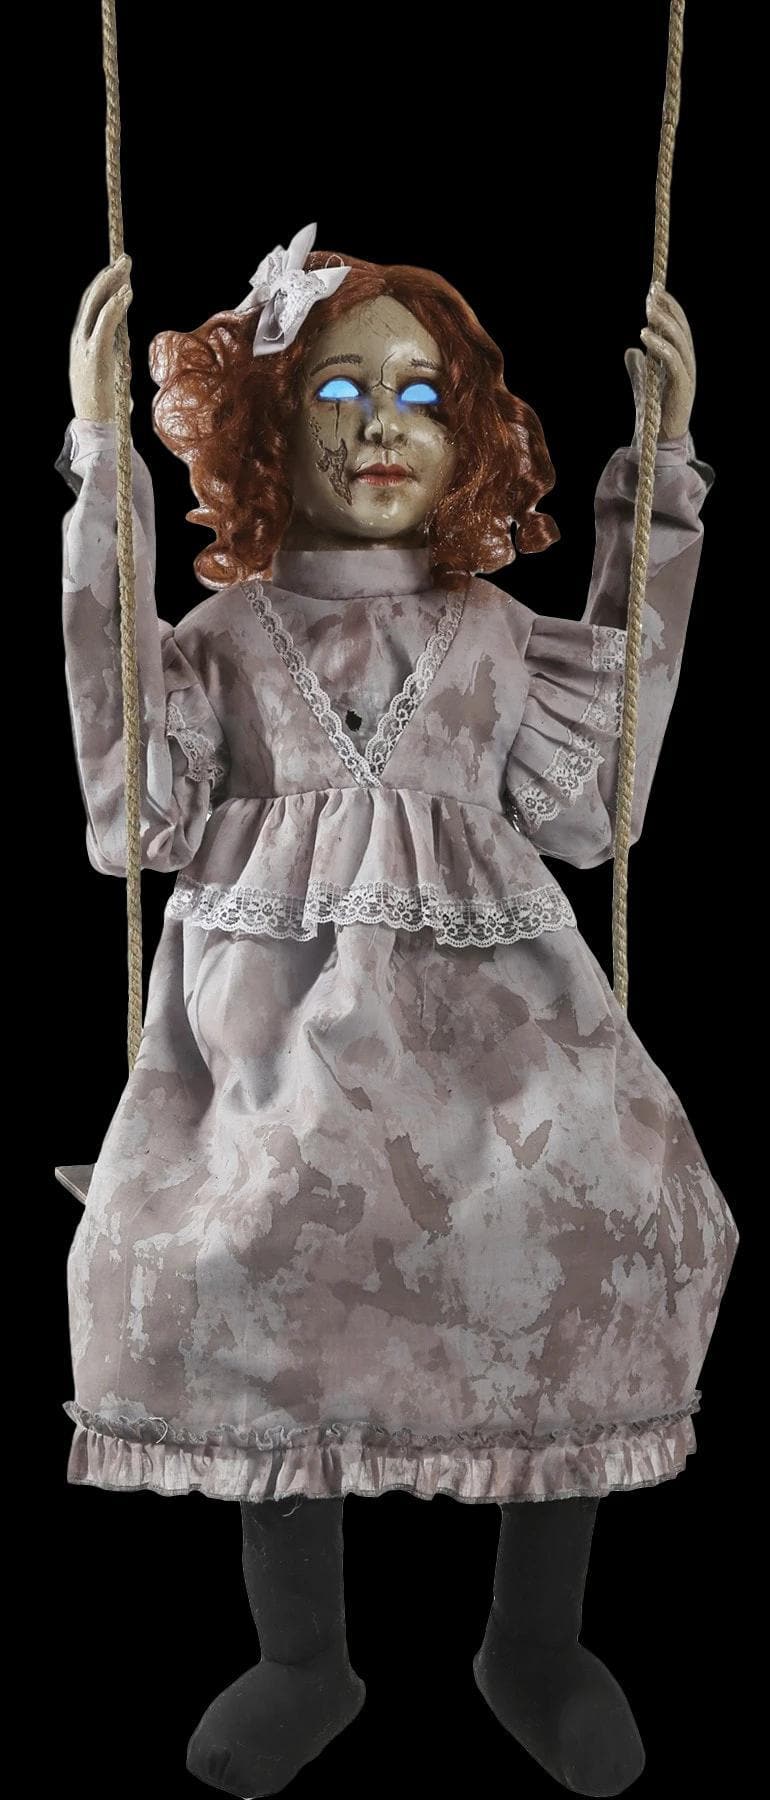 "Swinging Decrepit Doll" Electric Animated Halloween Prop